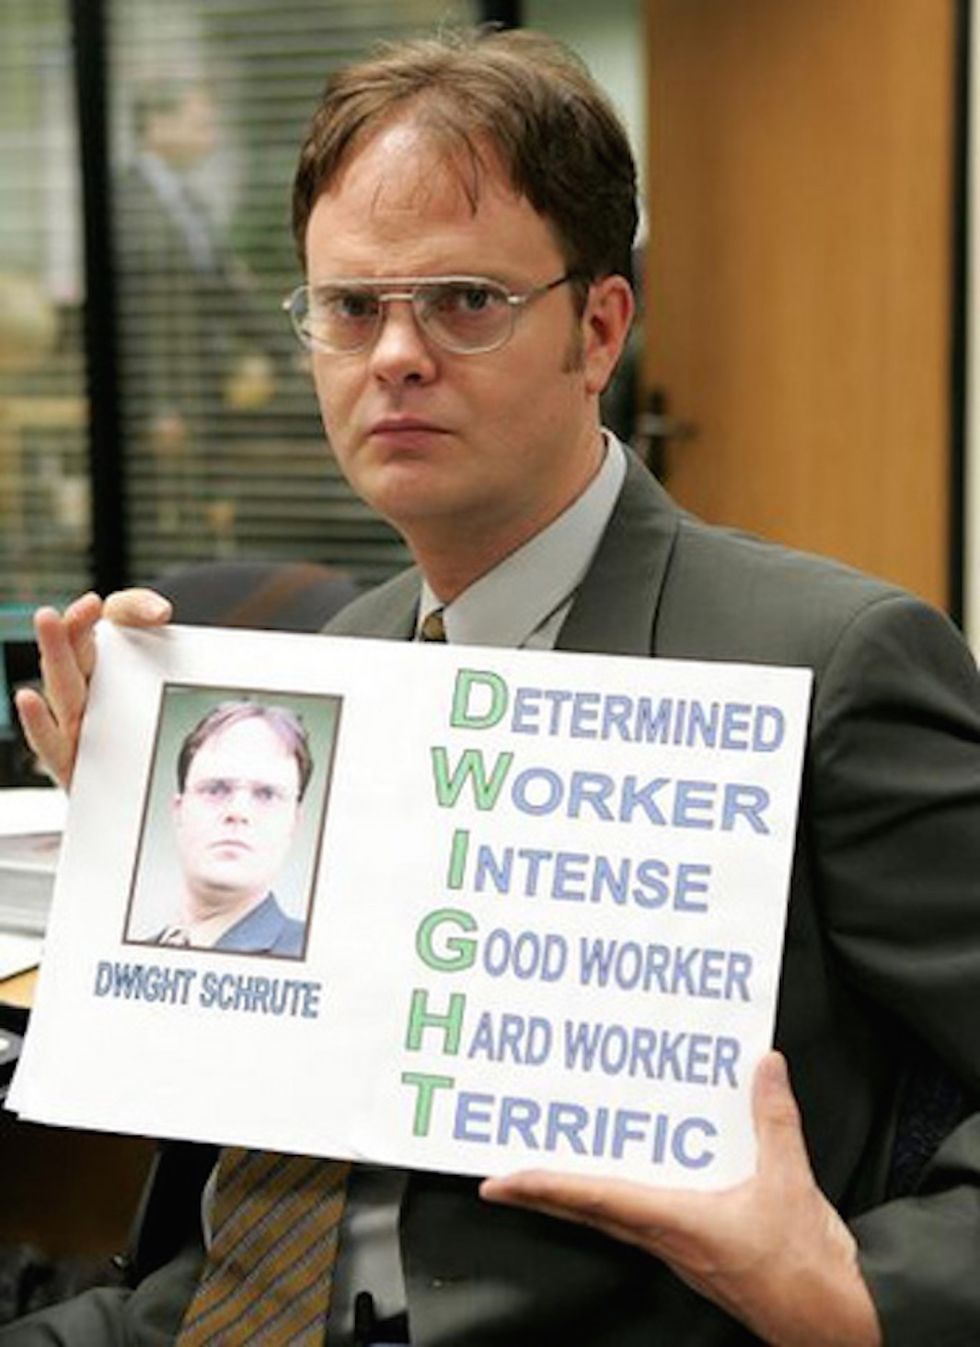 The End Of The Semester, As Told By Dwight Schrute